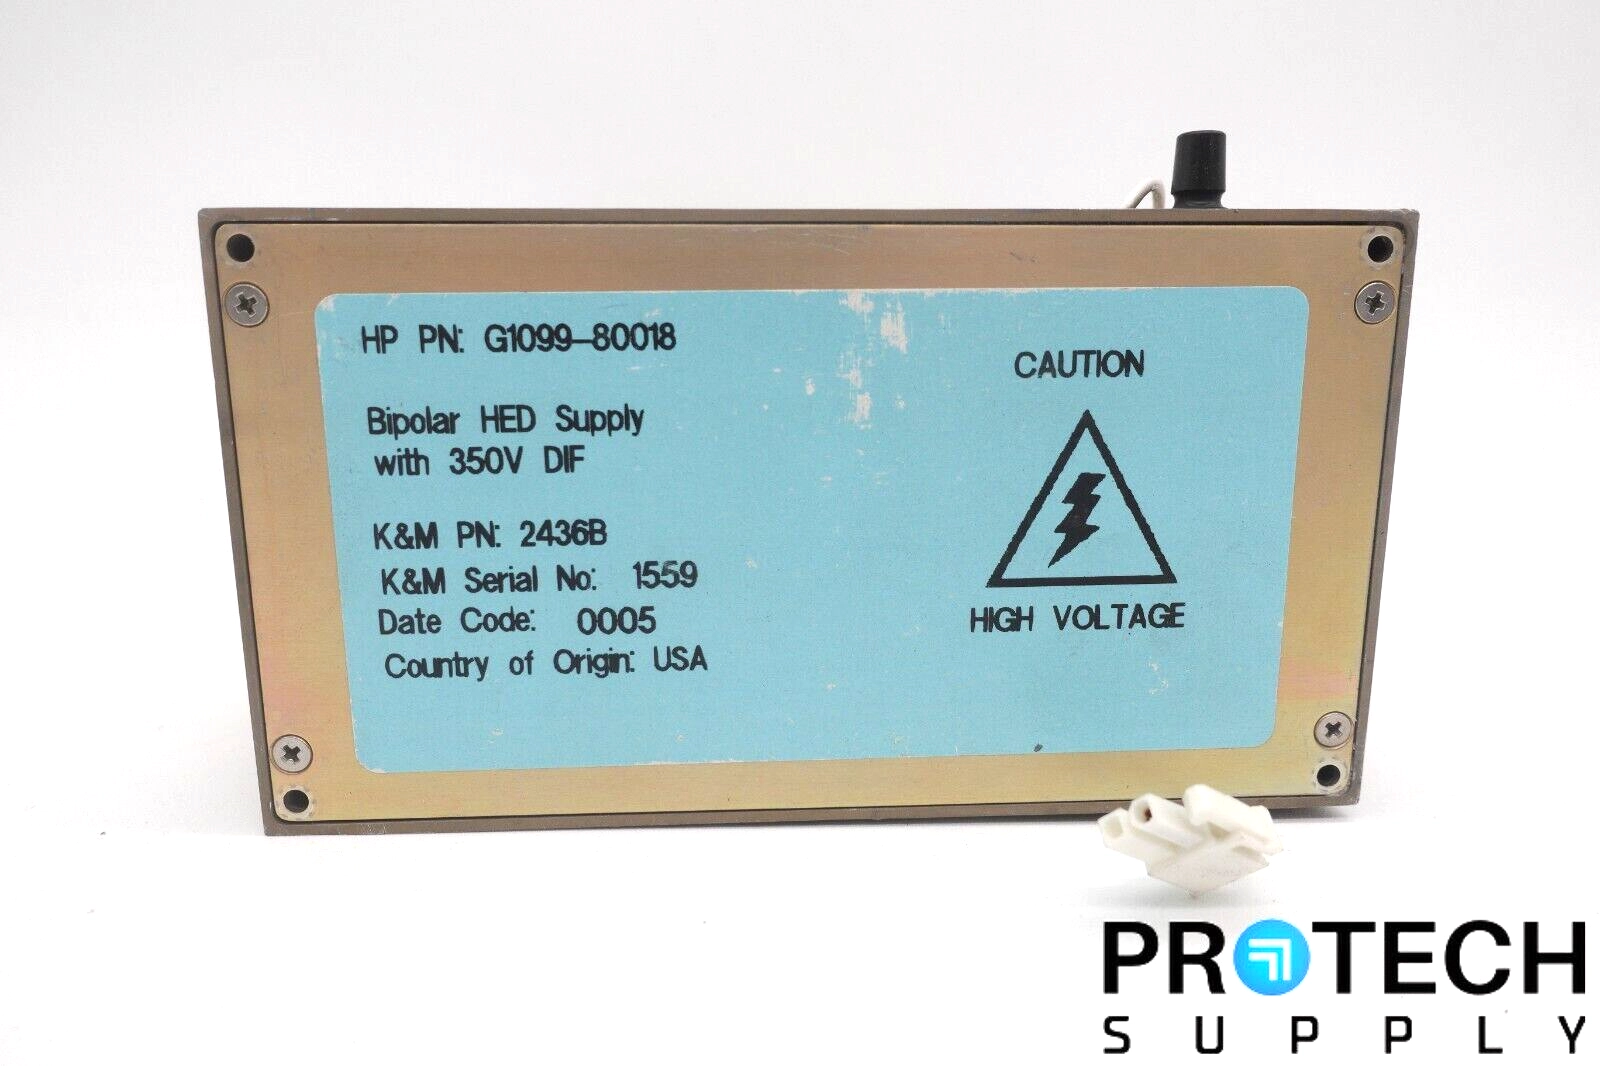 HP / Agilent G1099-80018 BI-POLAR HED Supply with 